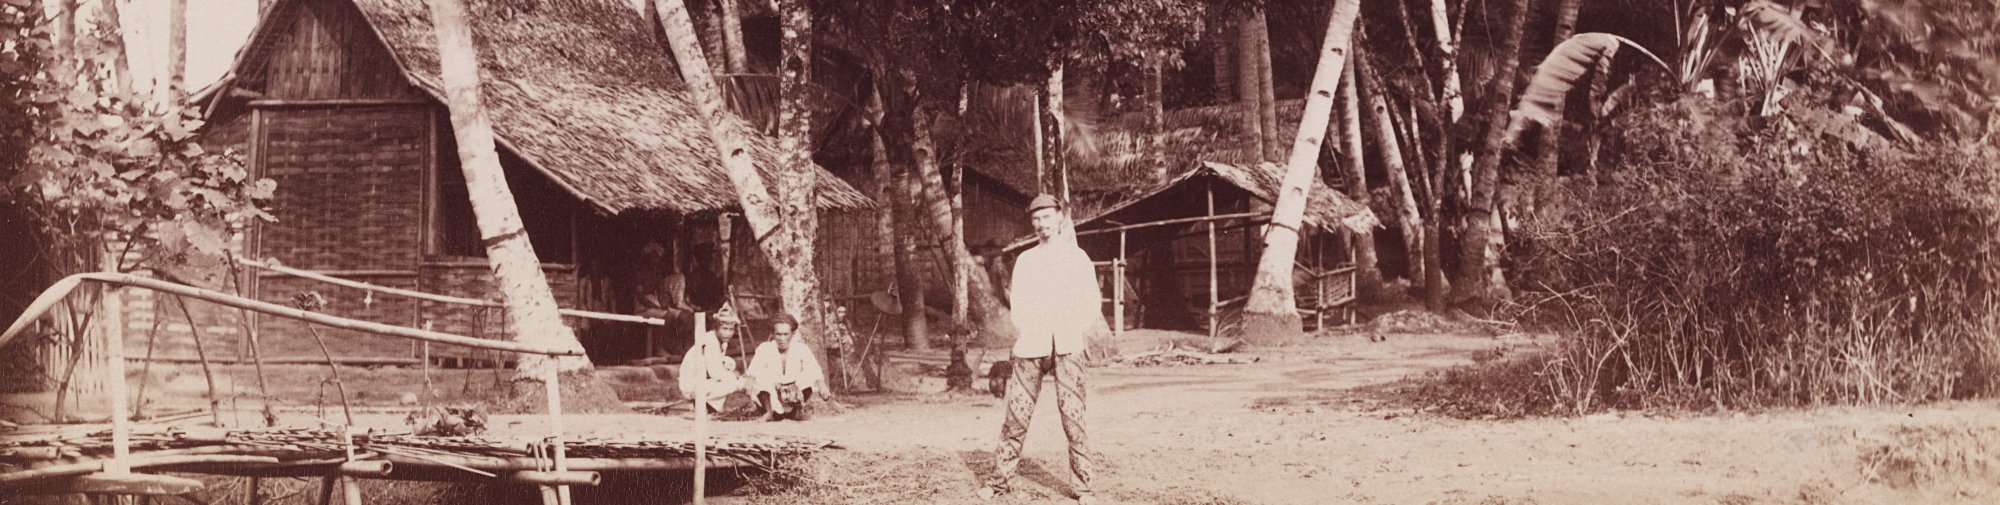 Sidney W. Brown with two natives, Indonesia 1888, Langmatt Museum Archive